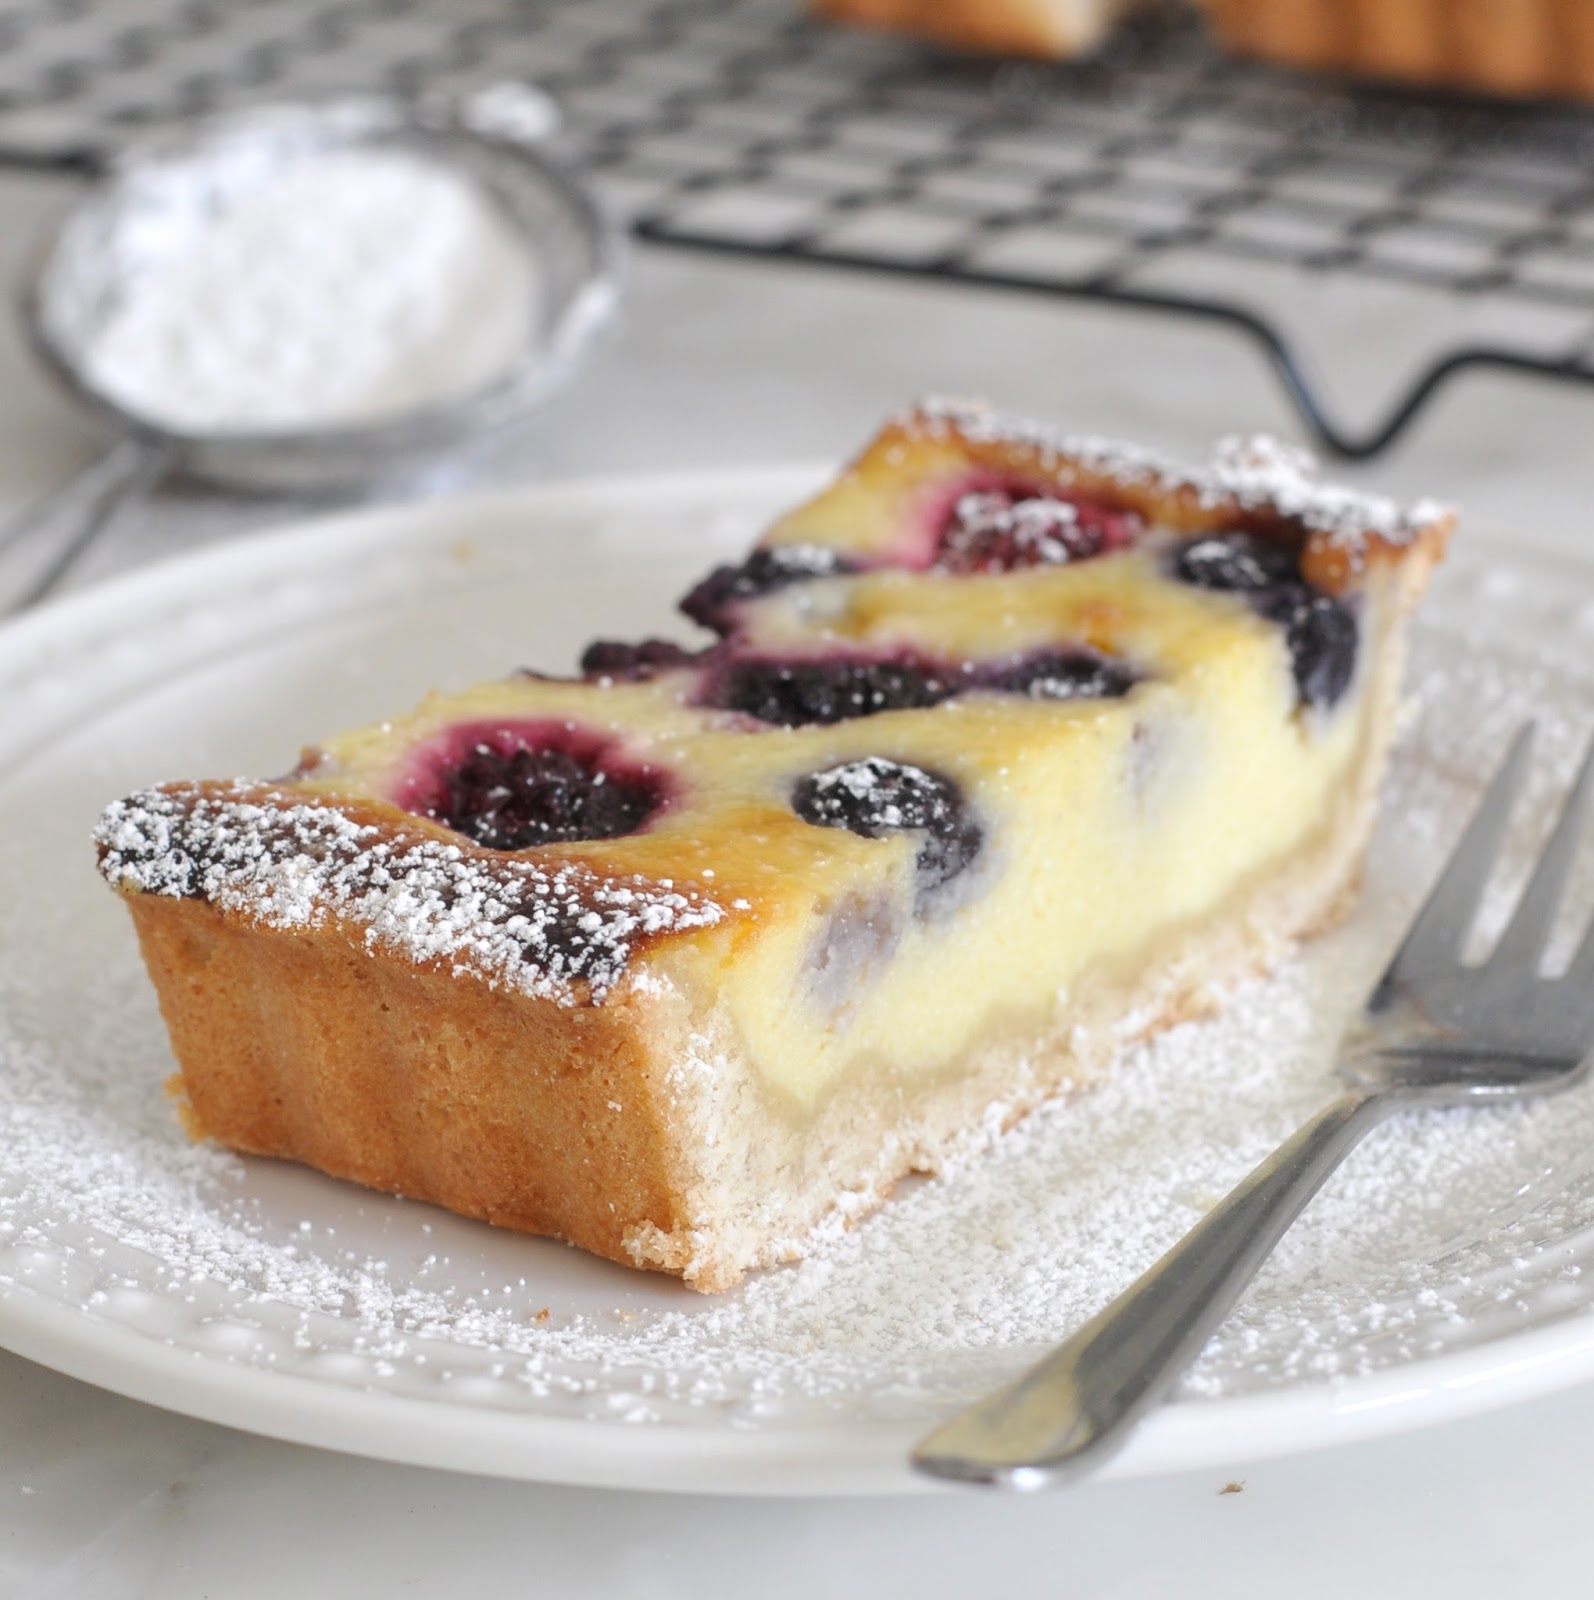 Cooking with Manuela: Made from Scratch Ricotta and Berry Tart Recipe